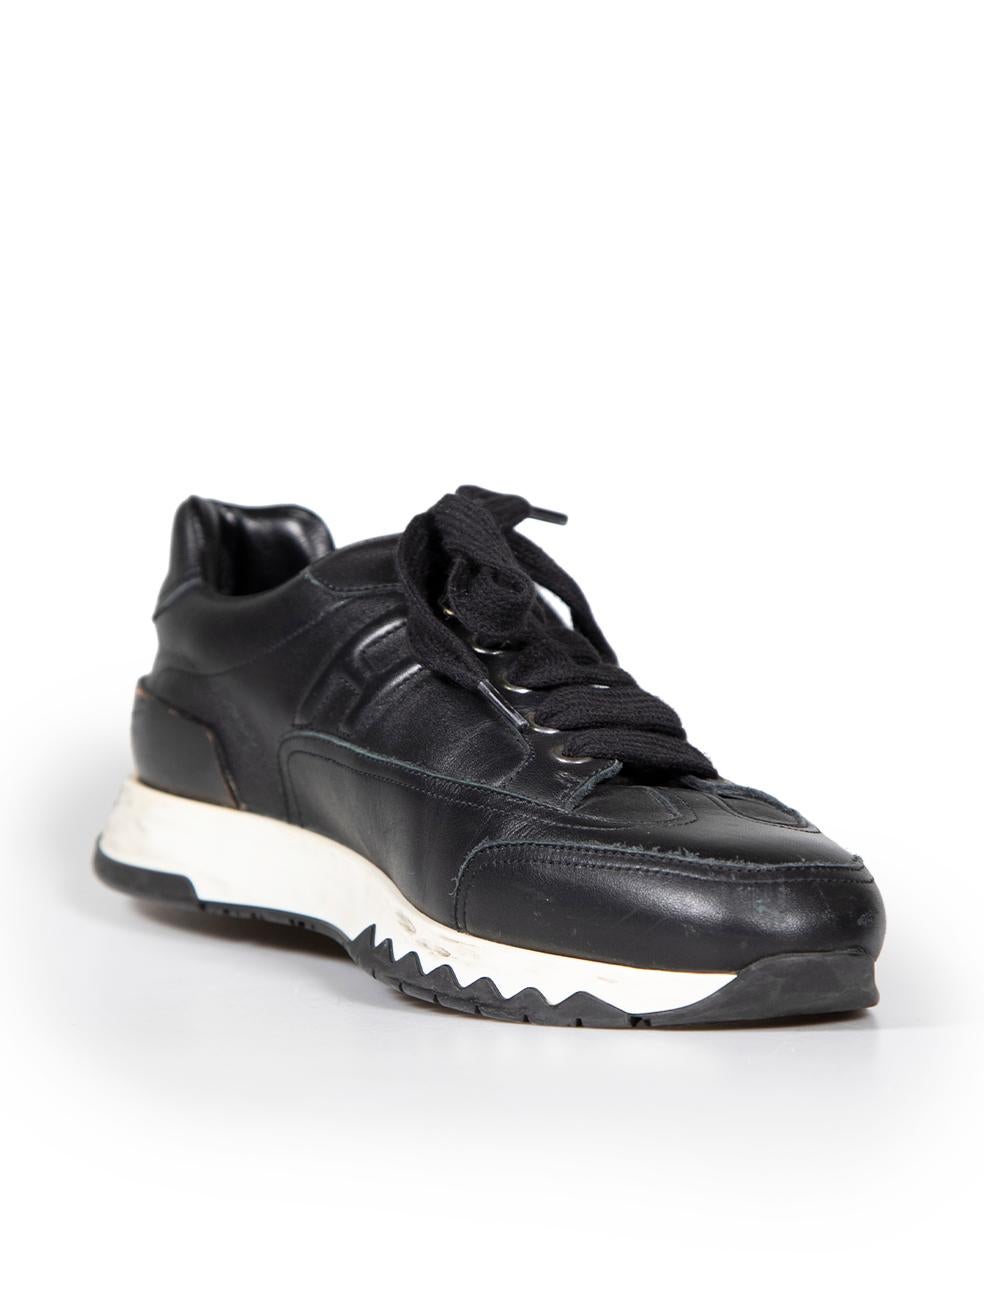 CONDITION is Good. General wear to shoes is evident. Moderate signs of wear to both sides, toes, outsoles and heels with marks and abrasions on this used Hermès designer resale item.
 
 
 
 Details
 
 
 Model: Trail
 
 Black
 
 Leather
 
 Trainers
